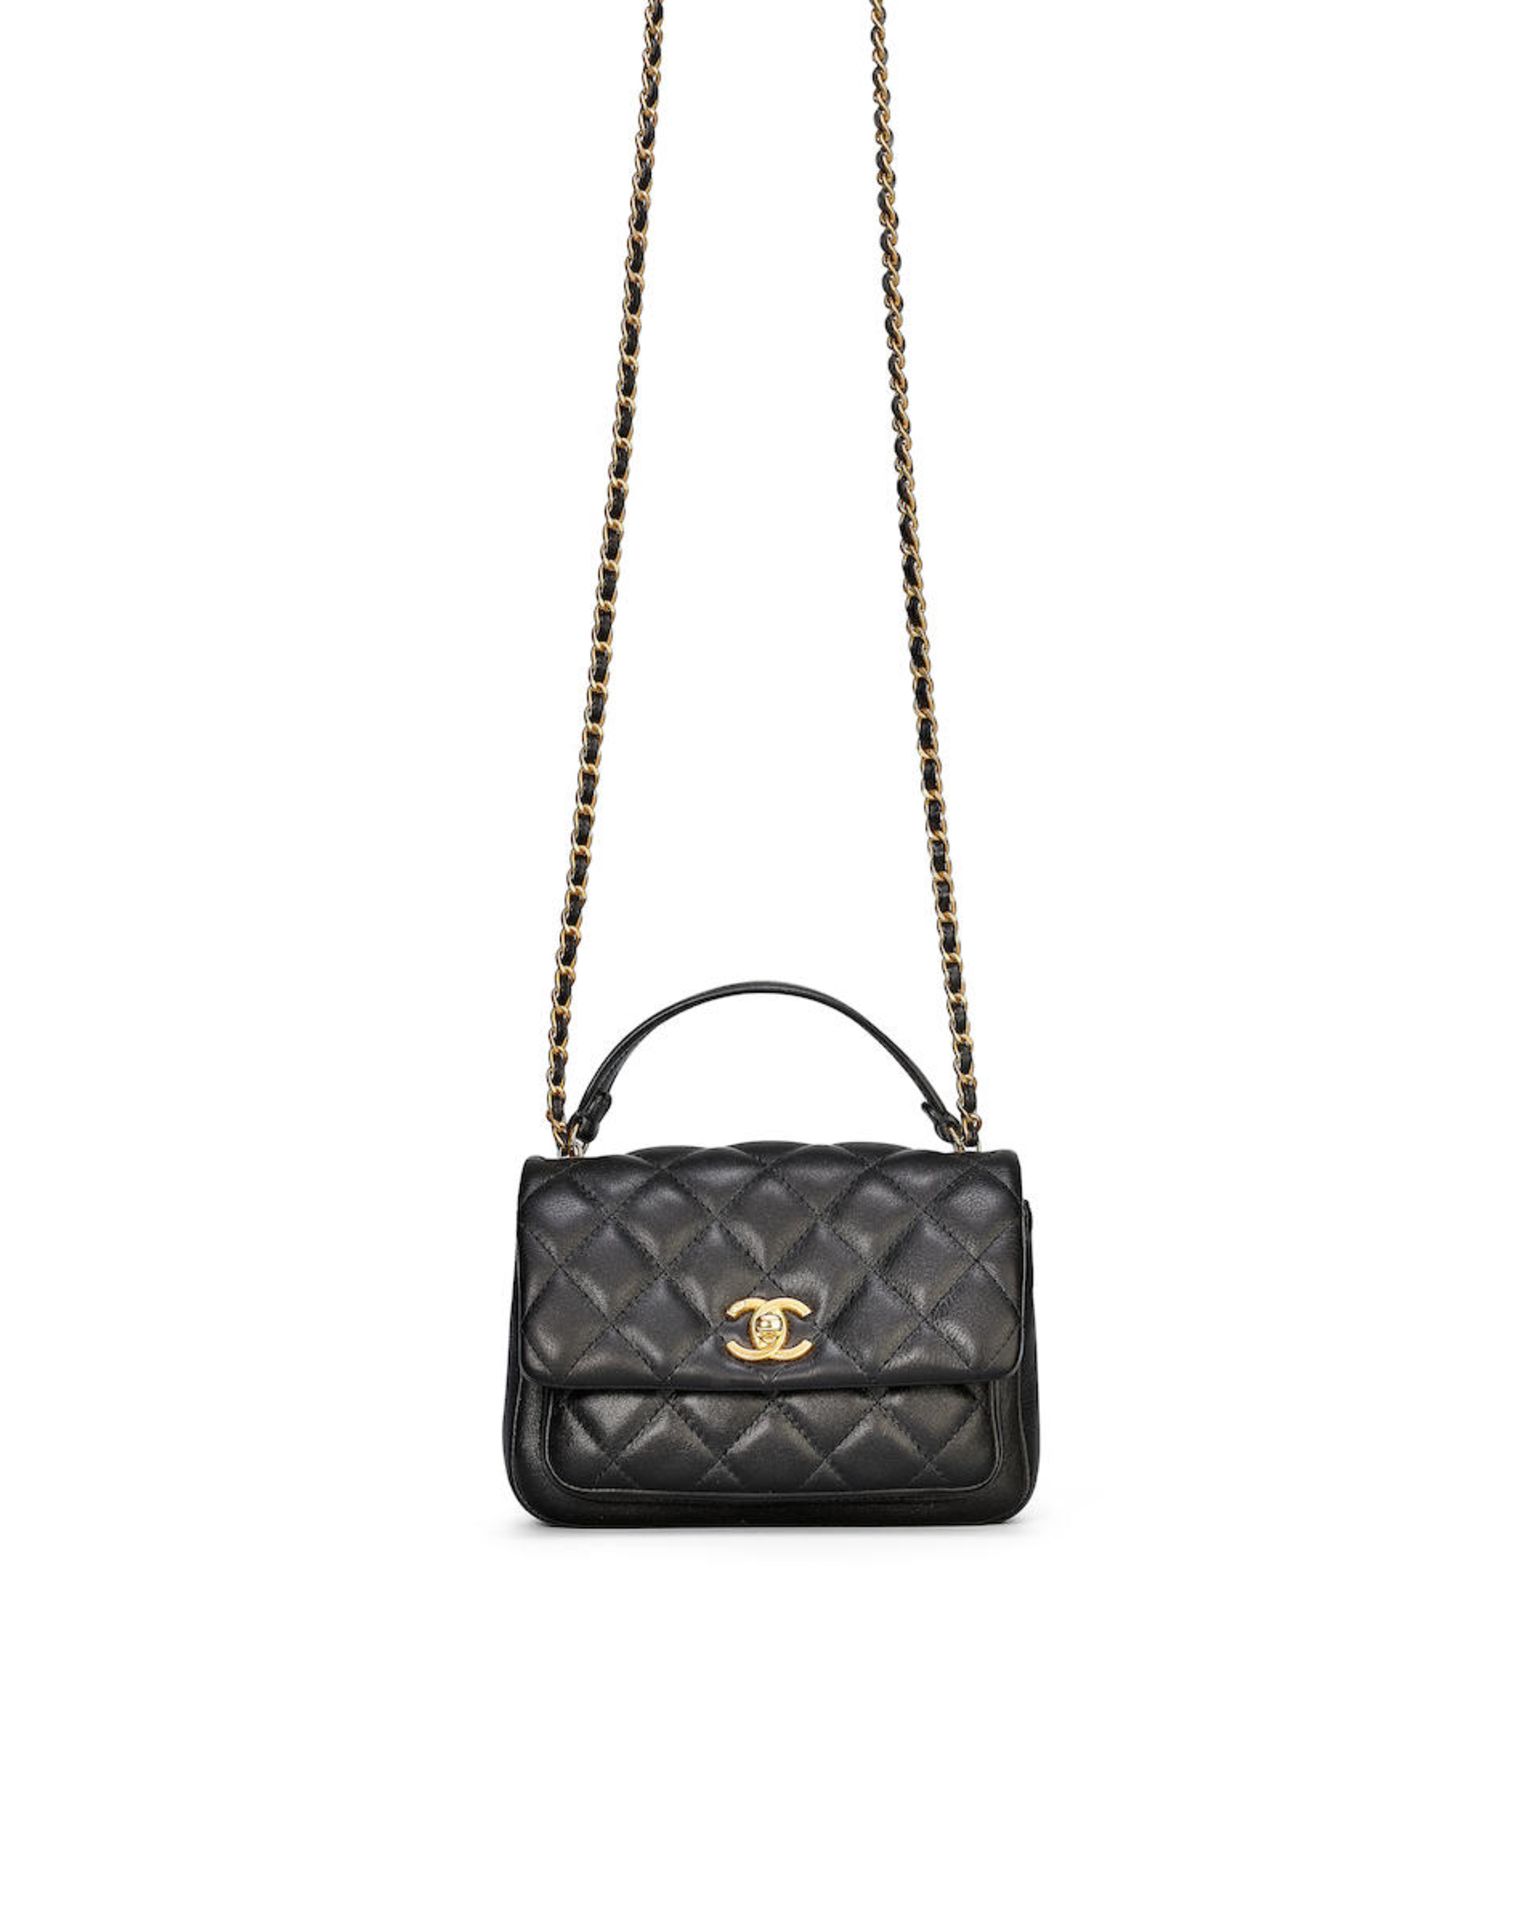 CHANEL: BLACK QUILTED CALFSKIN TOP HANDLE FLAP BAG WITH GOLD BRUSHED TONED HARDWARE (Includes se...